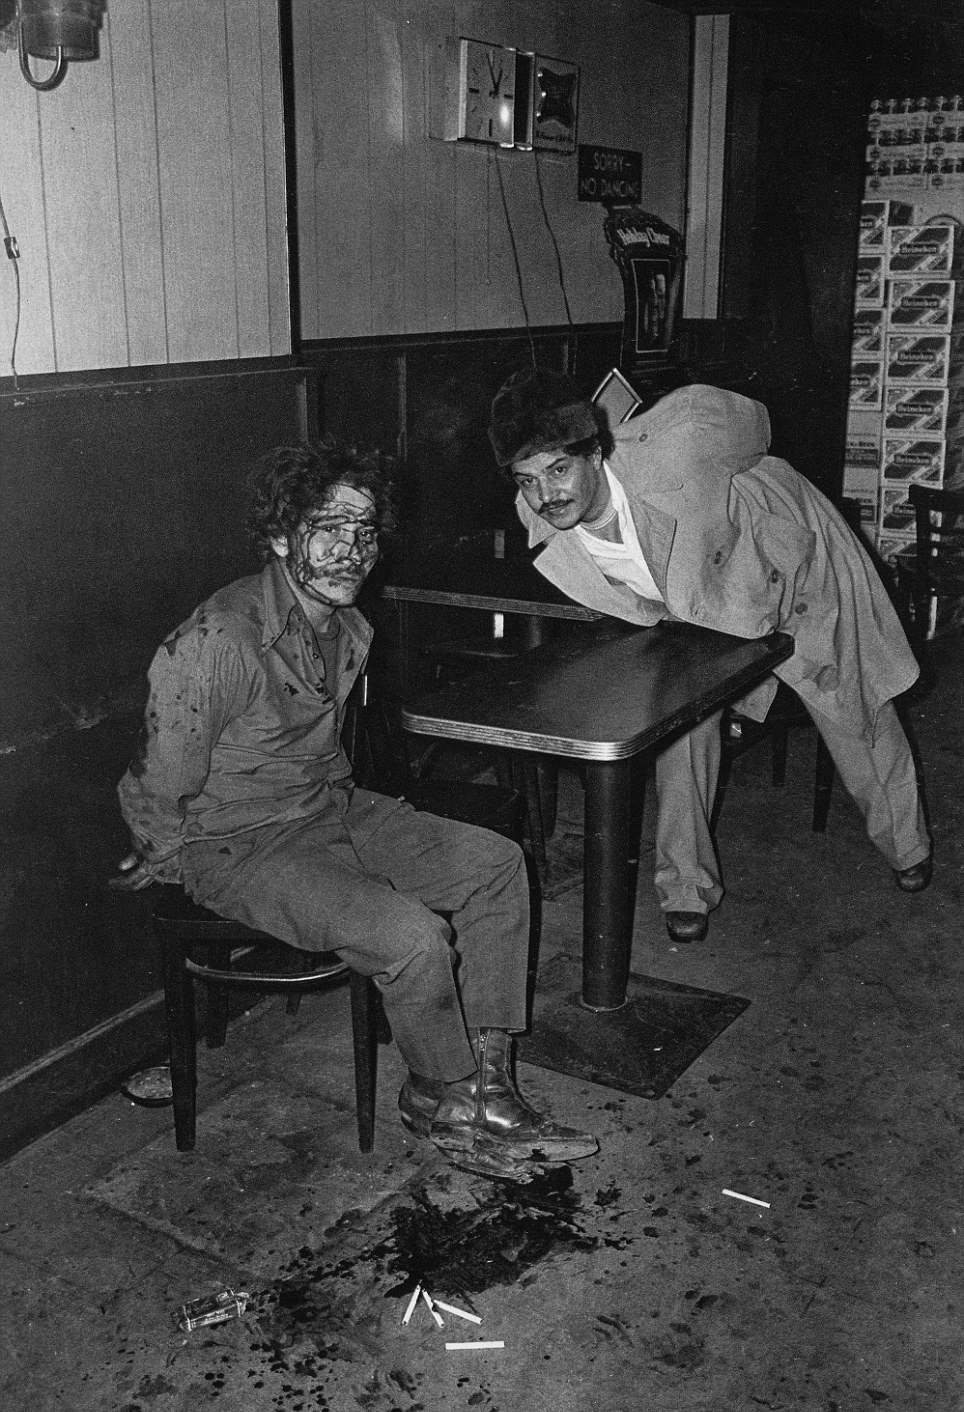 2 Men arrested after a bar fight pose for a picture in NYC, 1975.